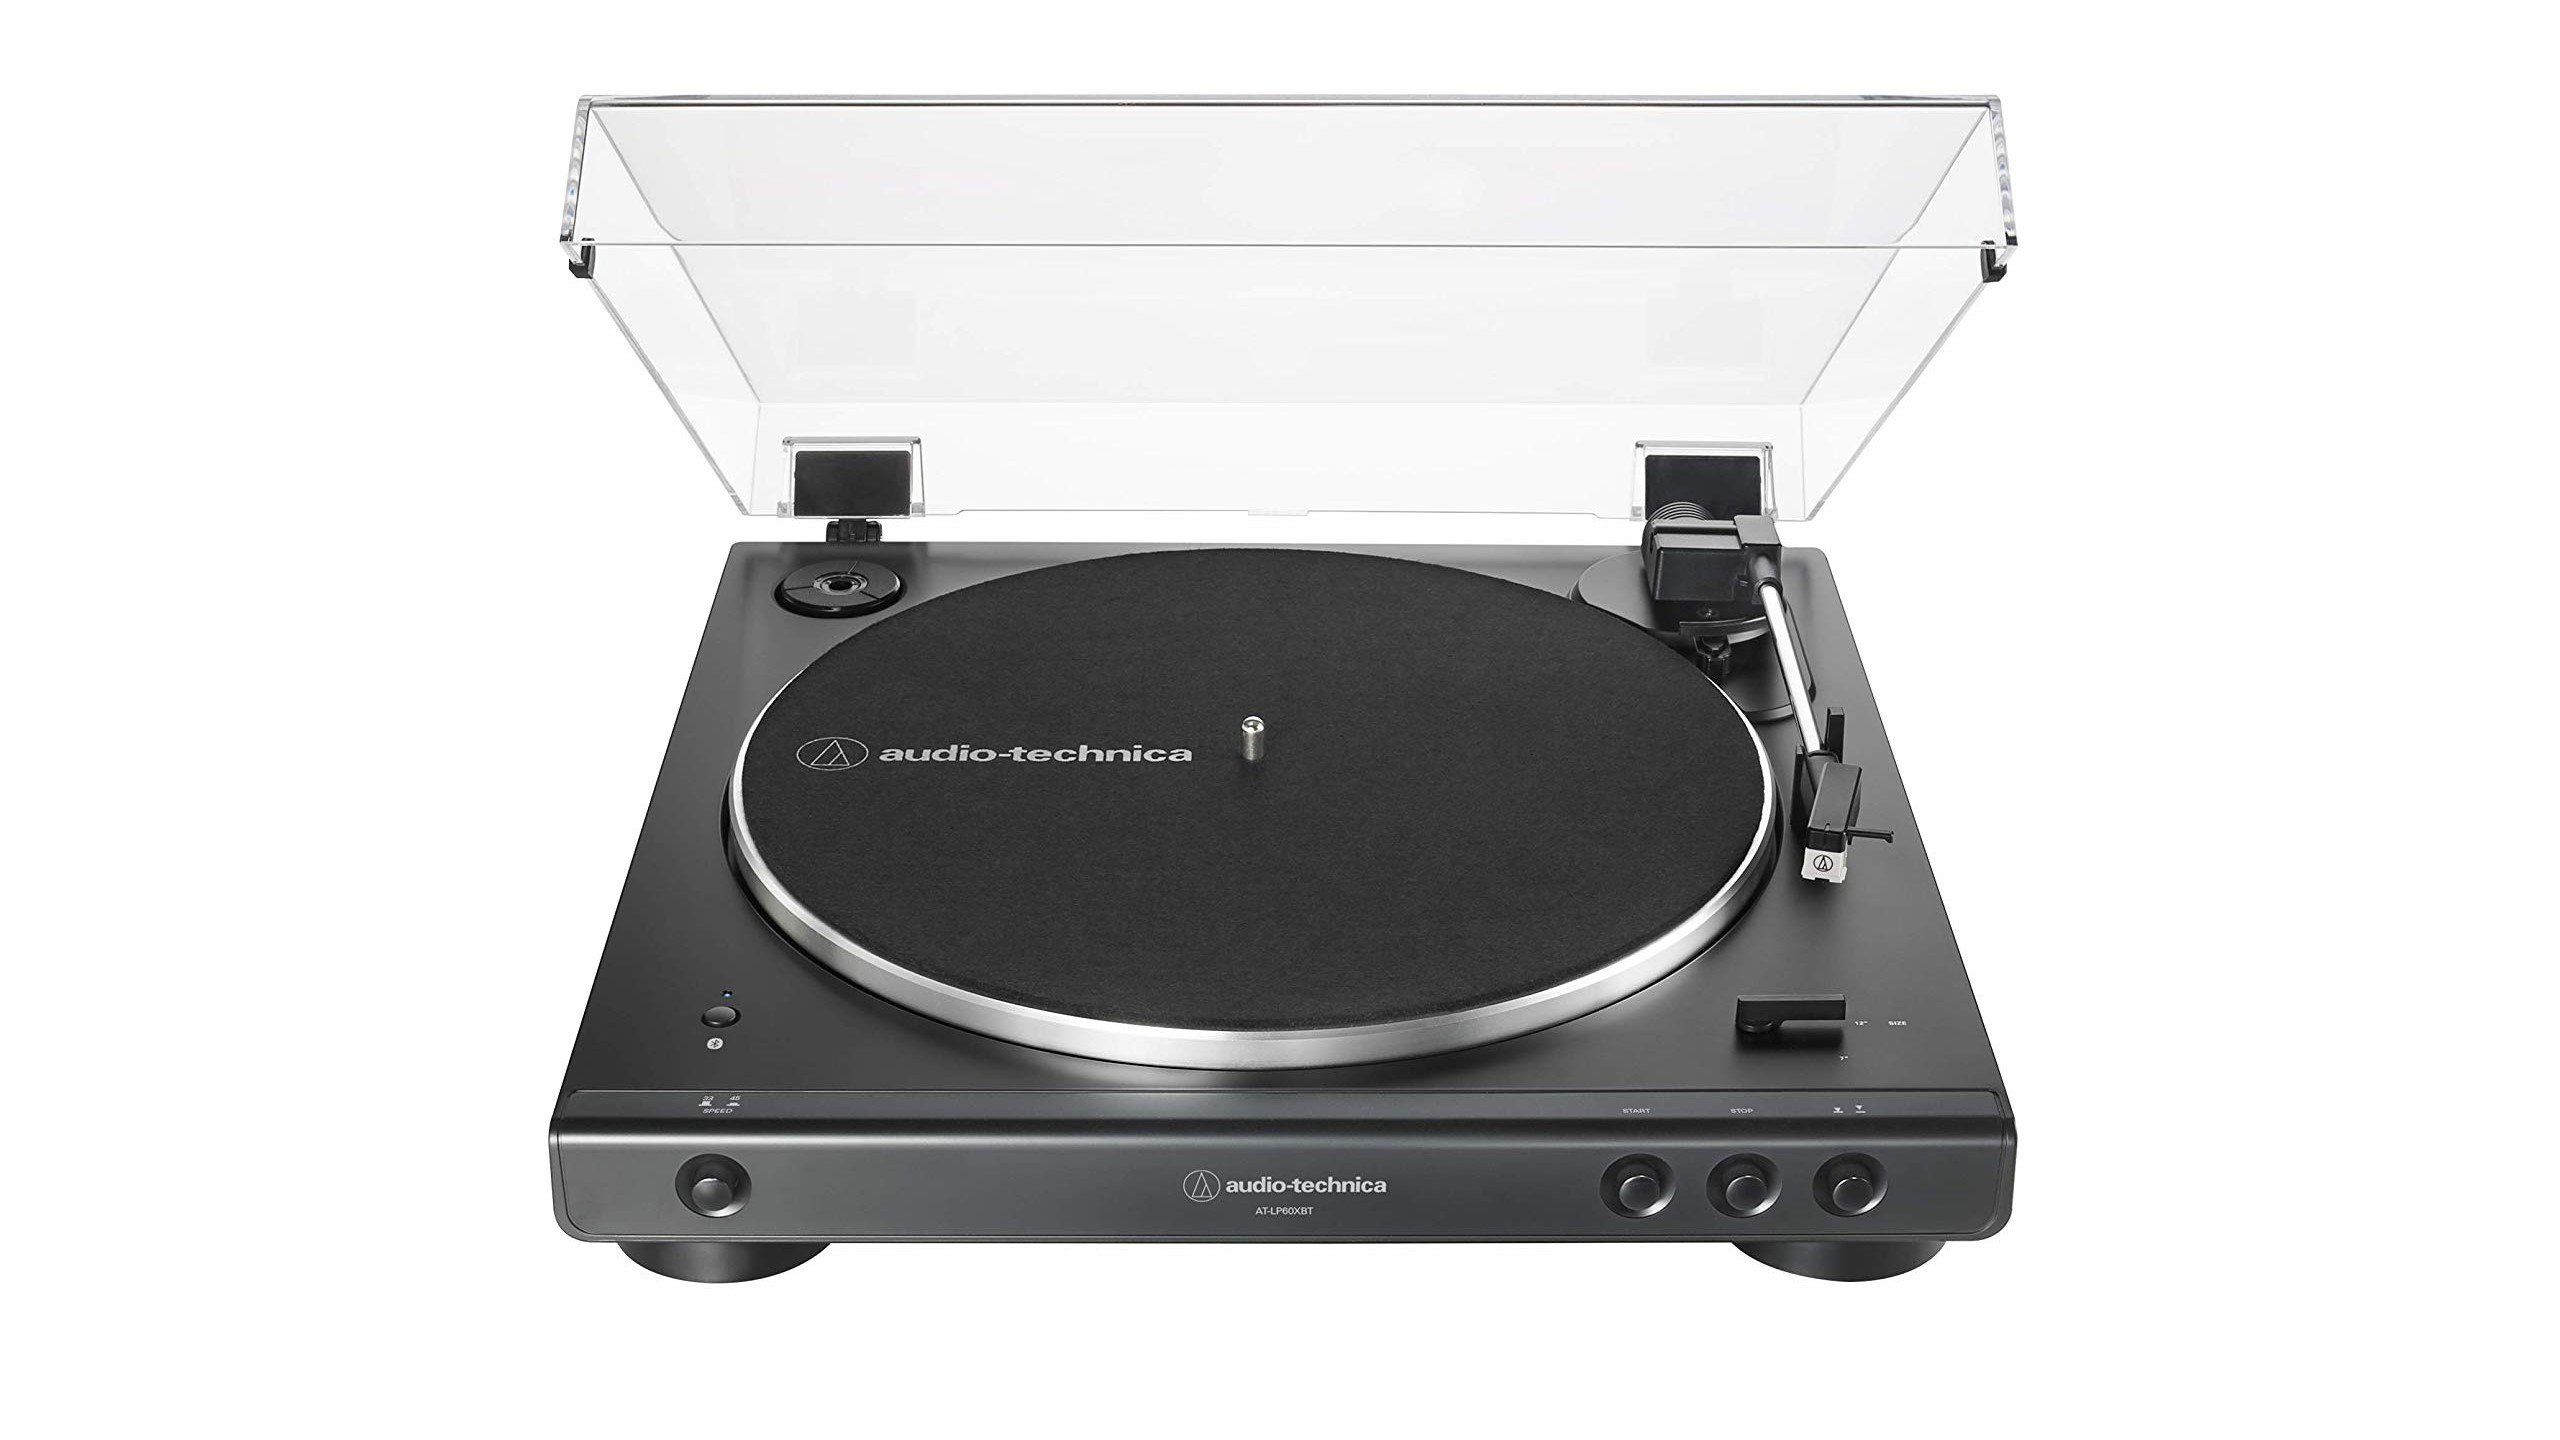 Audio-Technica AT-LP60XBT turntable on white background